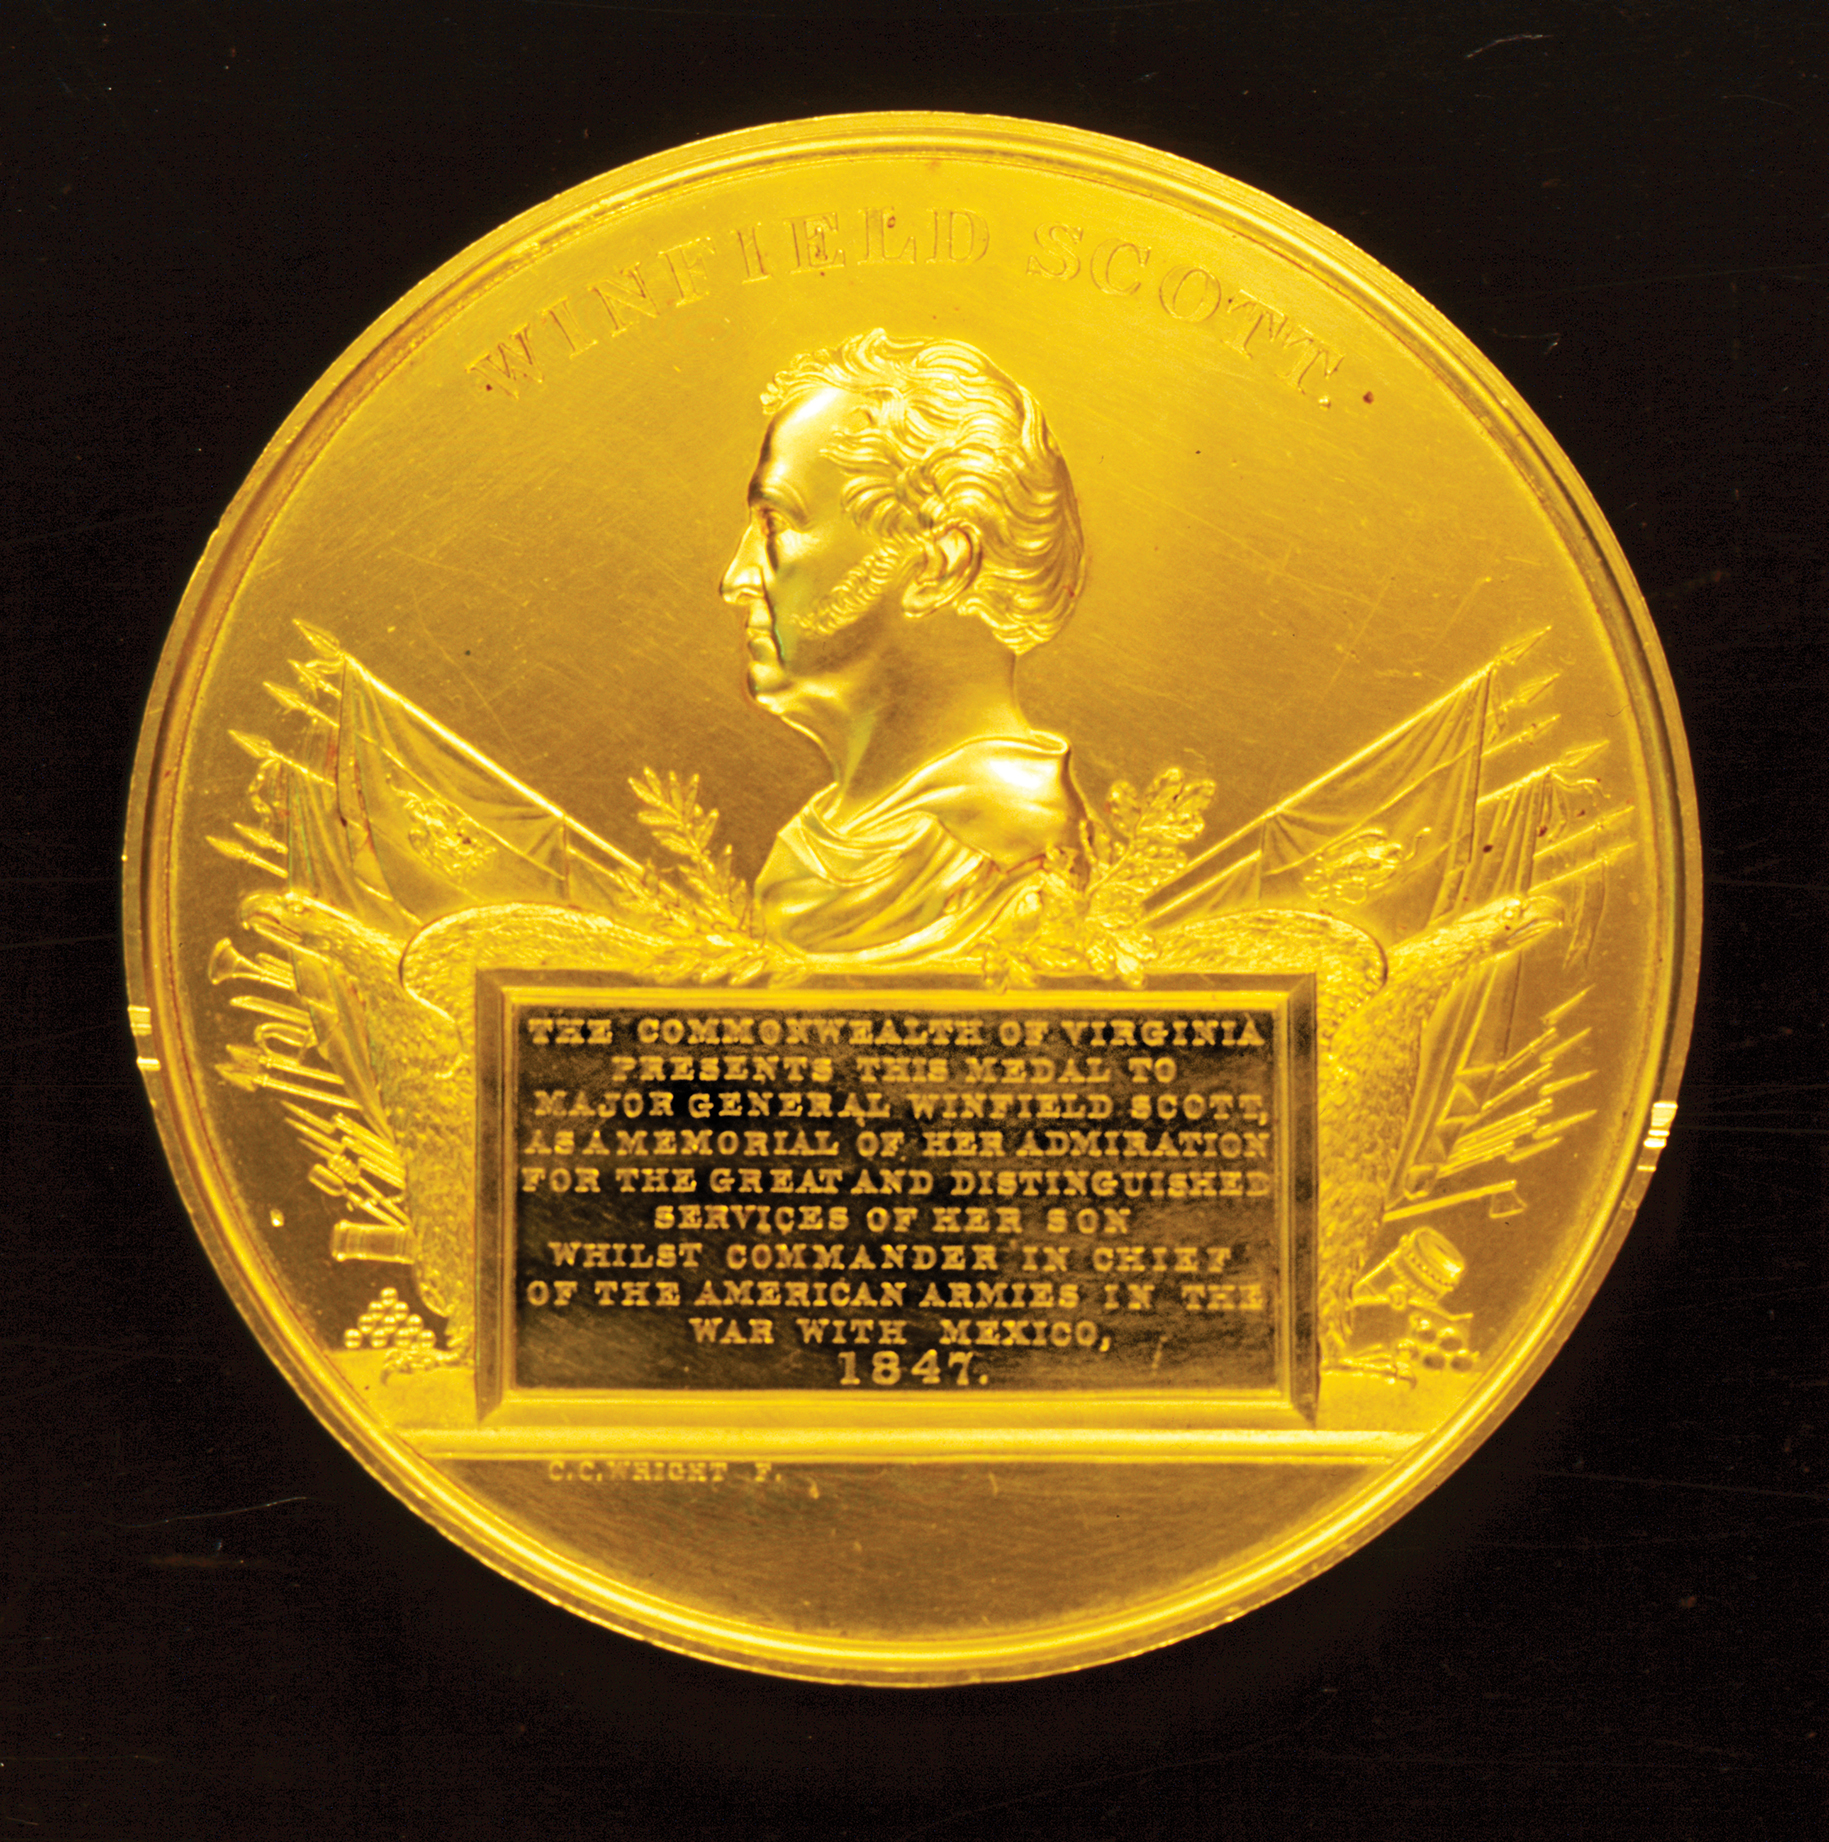 Gold Medal presented by Commonwealth of Virginia to honor Winfield Scott for victories in the Mexican War, 1847 , Gift of the estate of Virginia Scott Hoyt